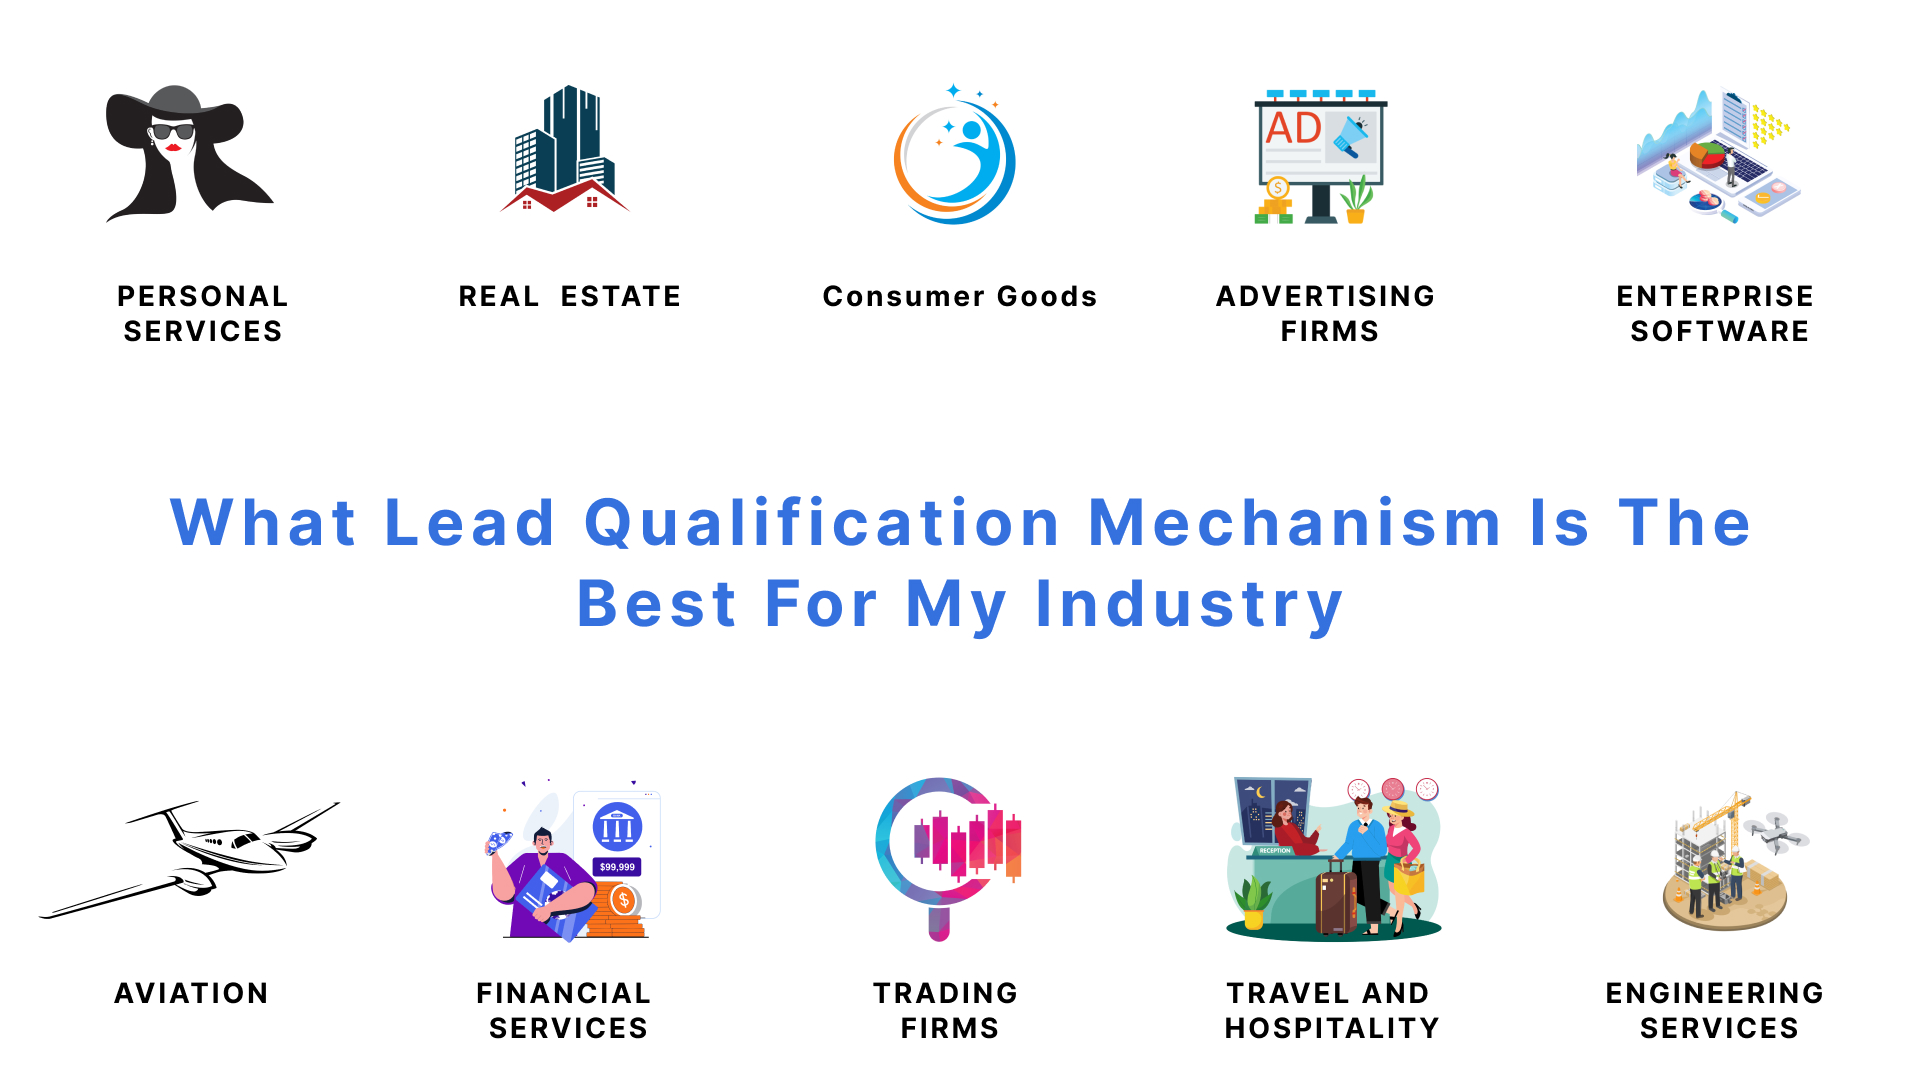 Choosing The Best Lead Qualification Method for Your Industry